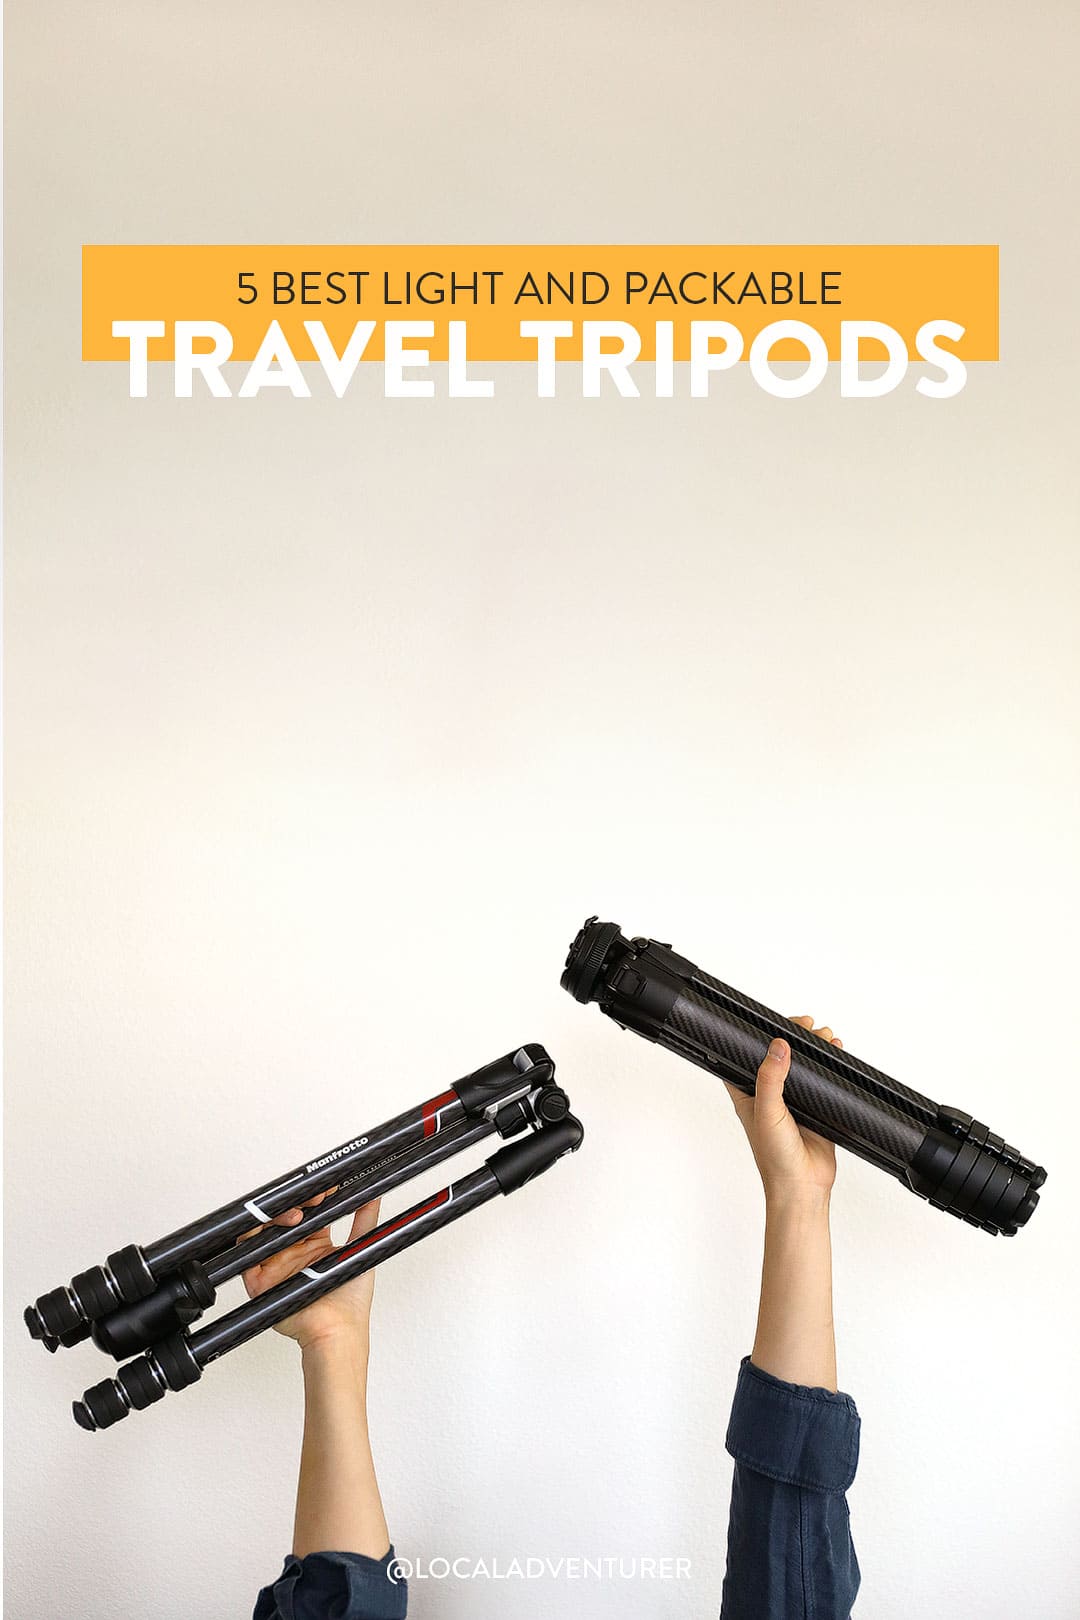 The 5 Best Travel Tripods That Are Lightweight, Packable, and Easy to Use